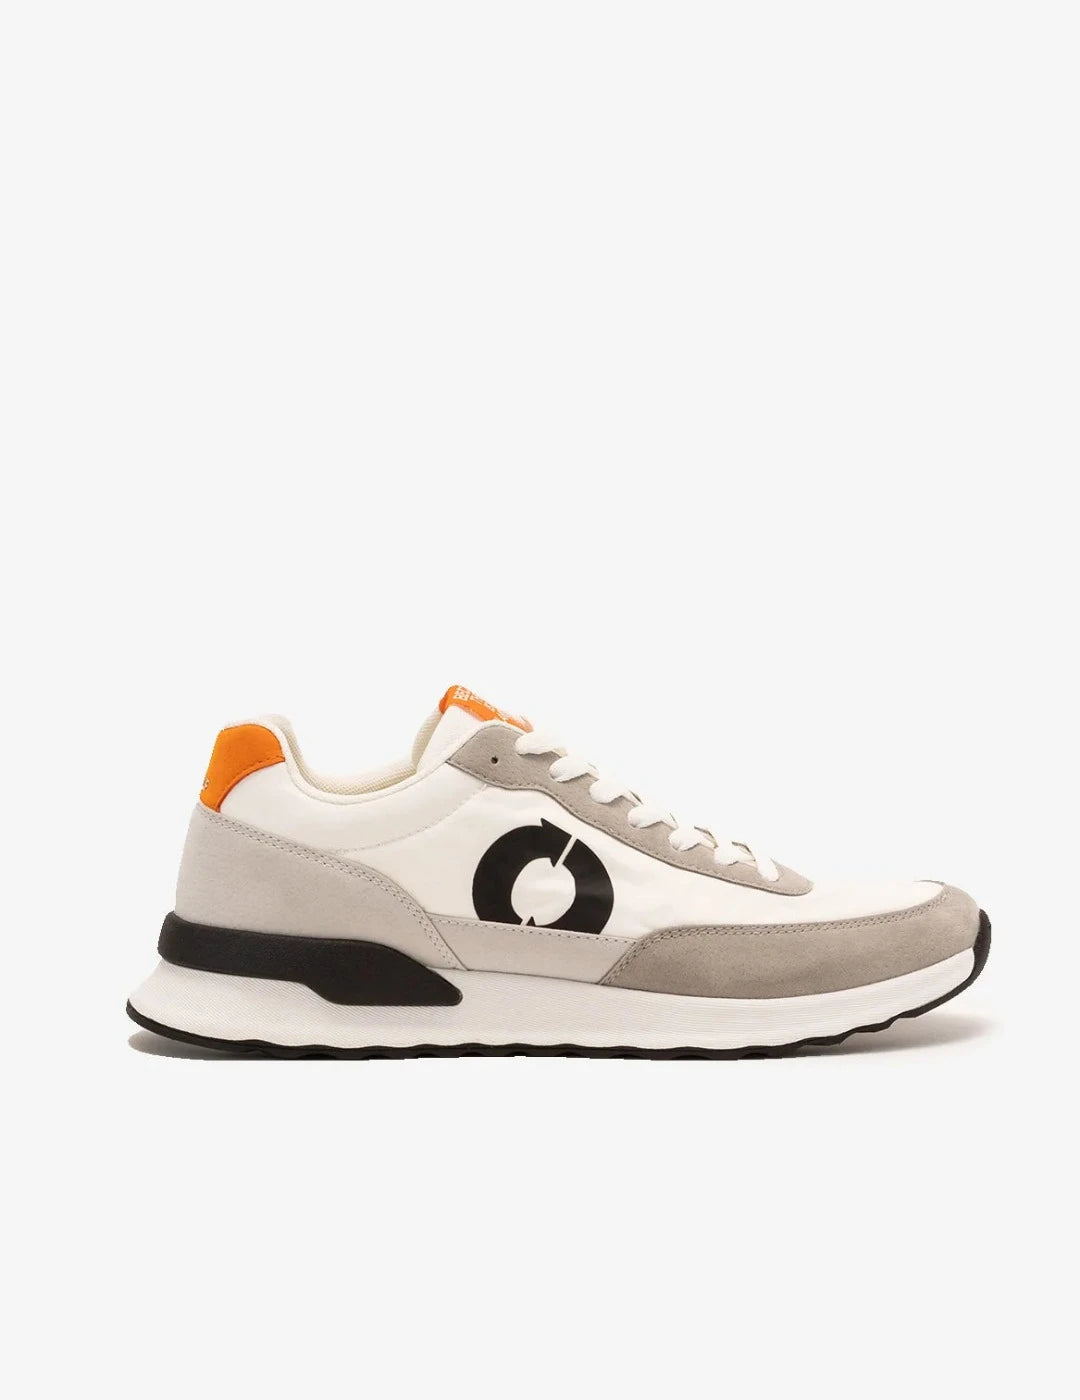 OFF WHITE/ GREY PRINCE TRAINERS